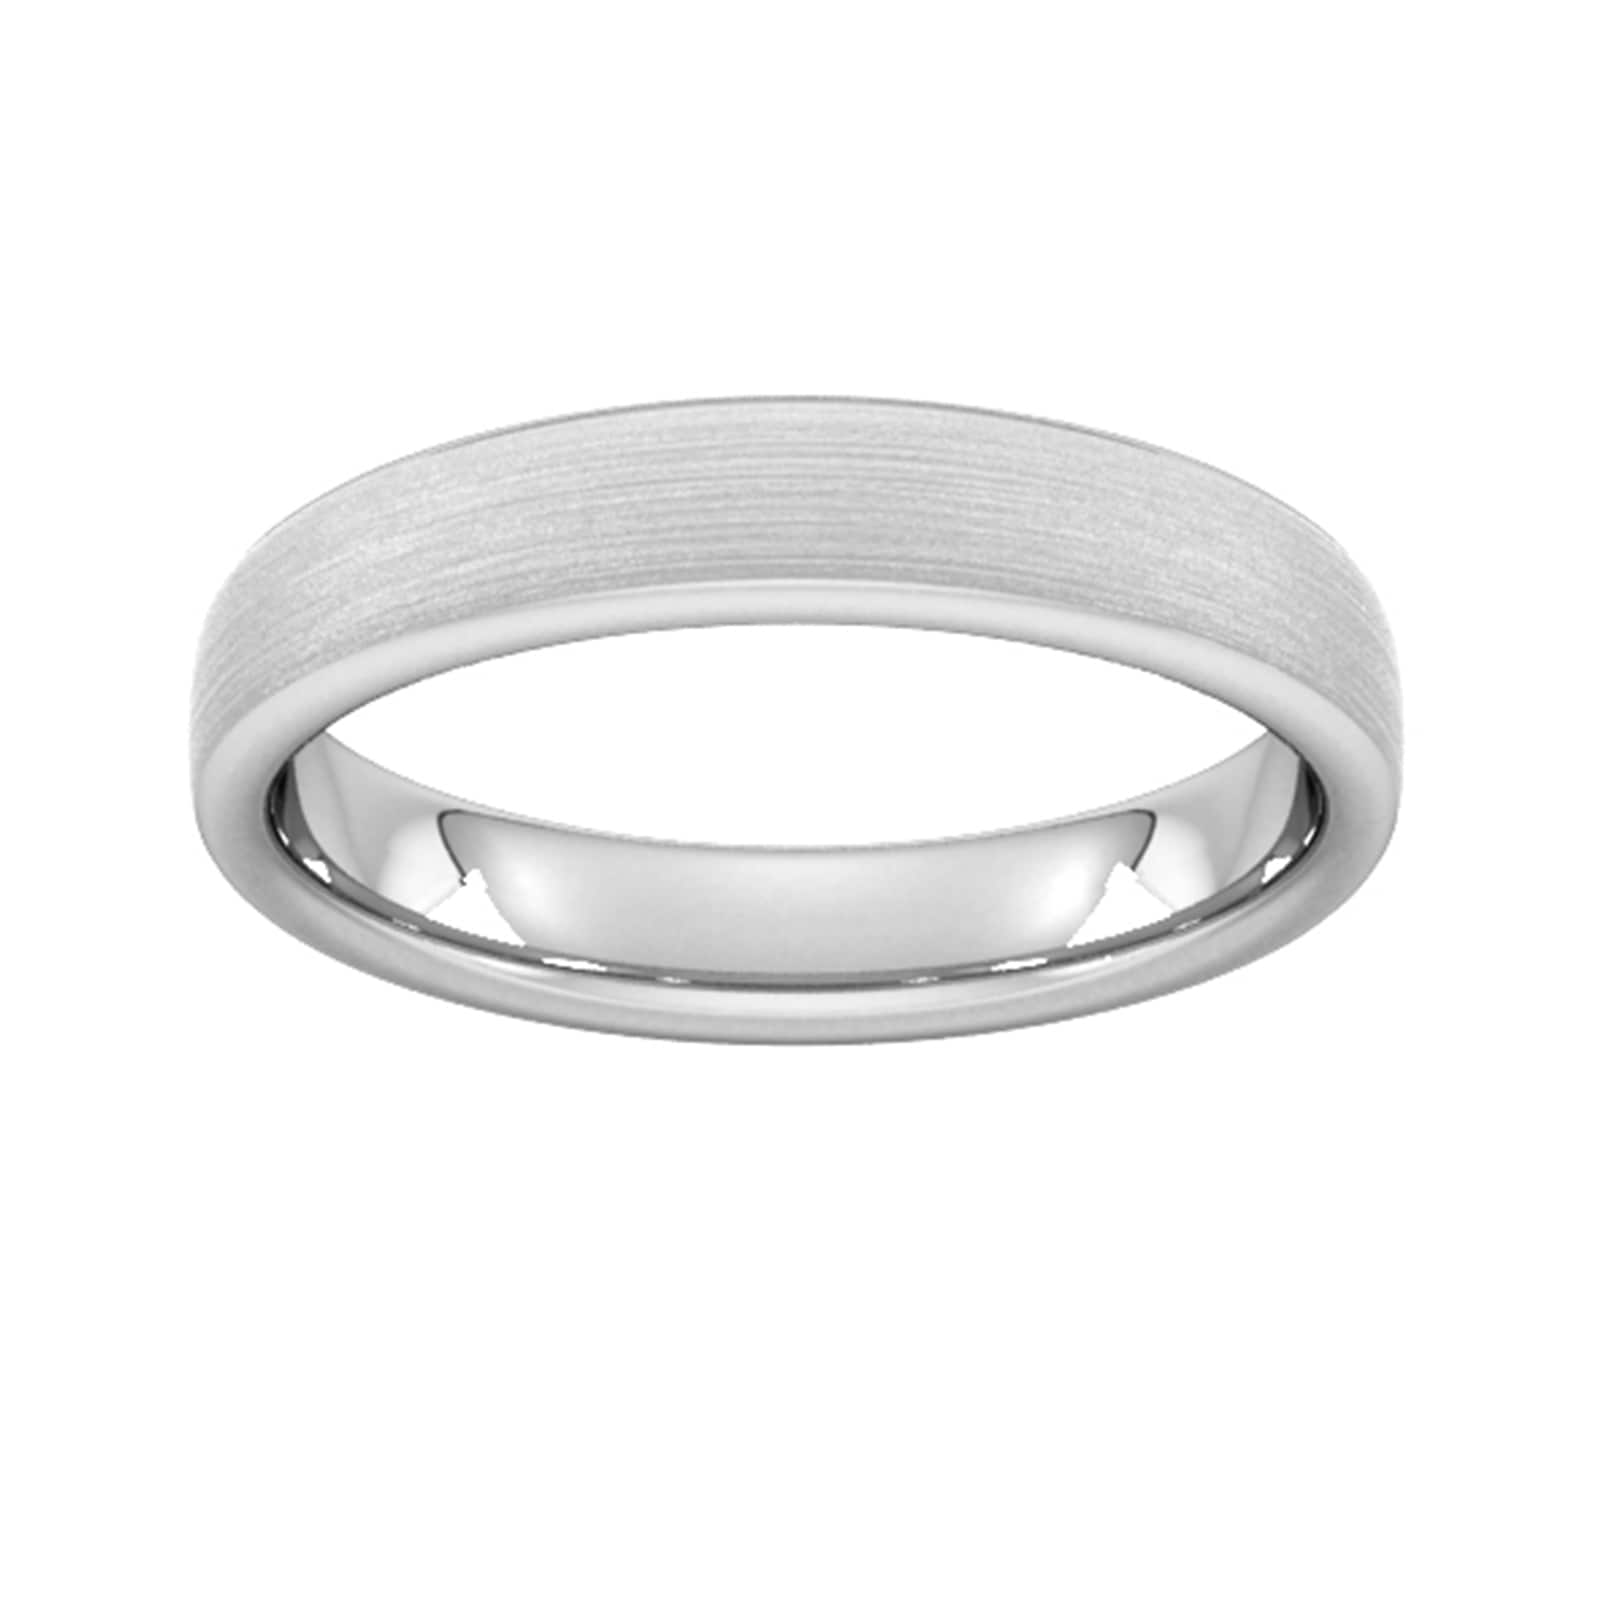 4mm Flat Court Heavy Matt Finished Wedding Ring In 18 Carat White Gold - Ring Size L